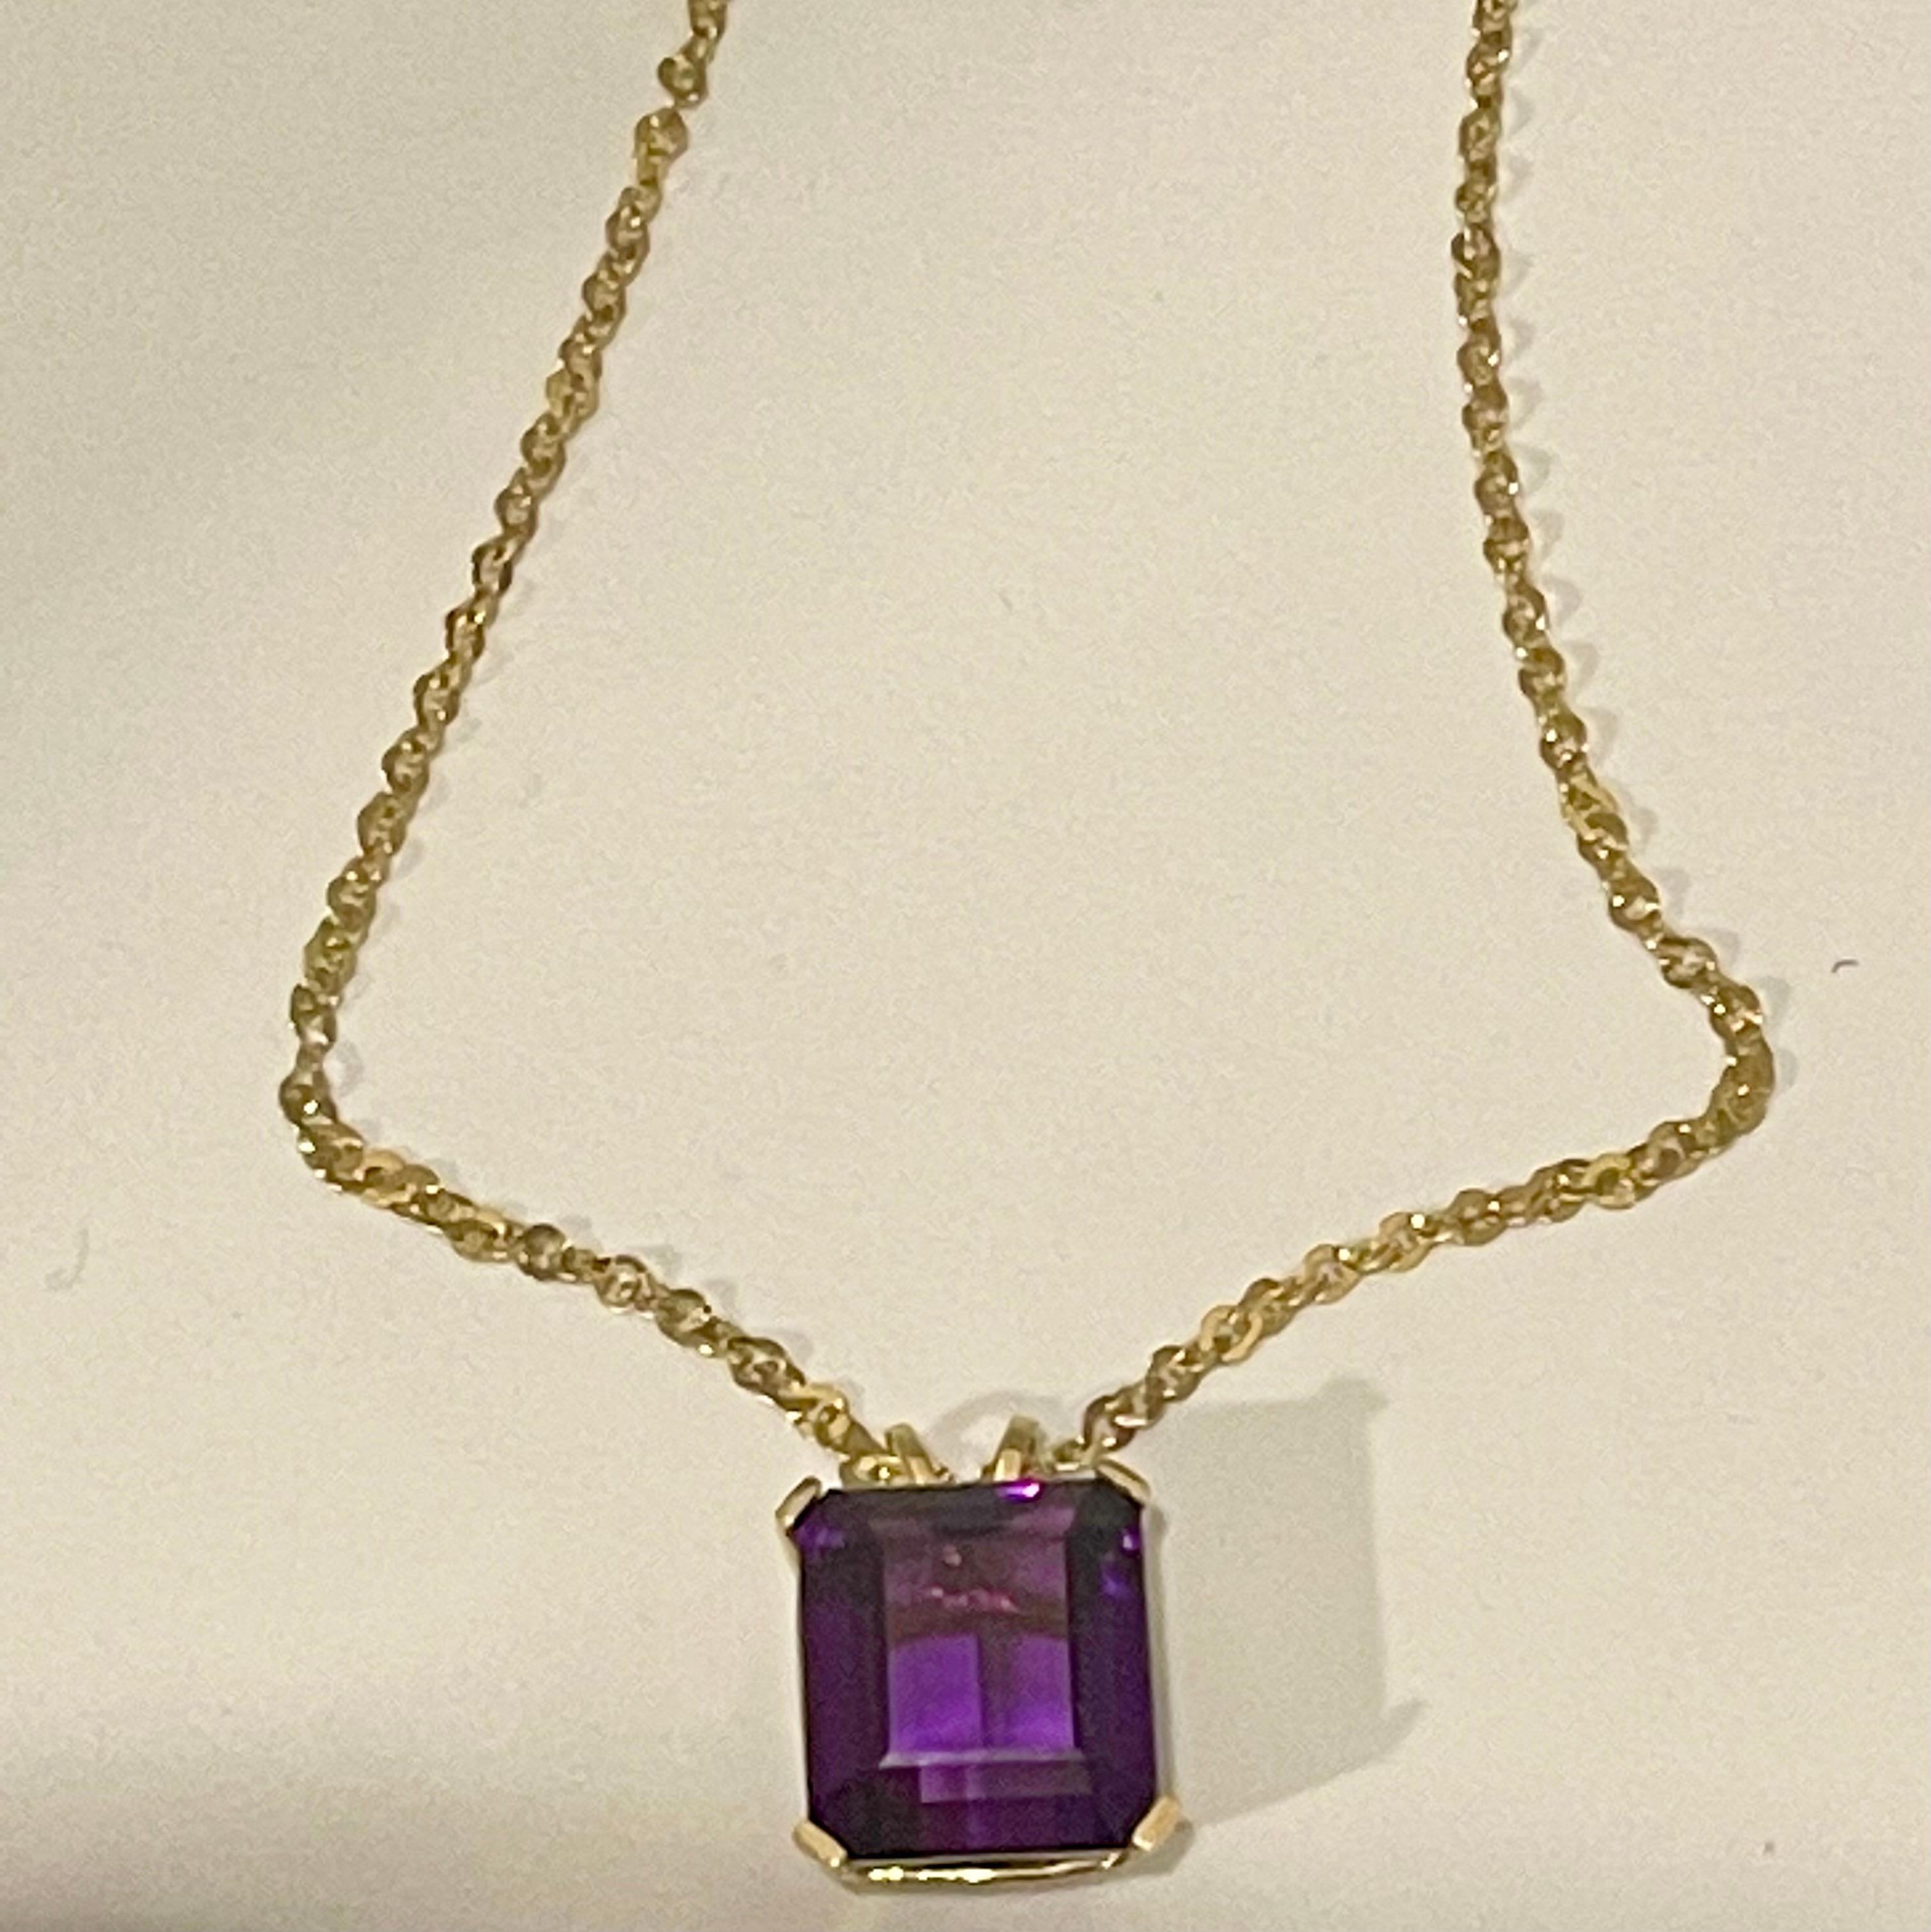 42 Ct Emerald Cut Amethyst Pendant /Necklace + 14 Kt Yellow Gold Chain Vintage 9